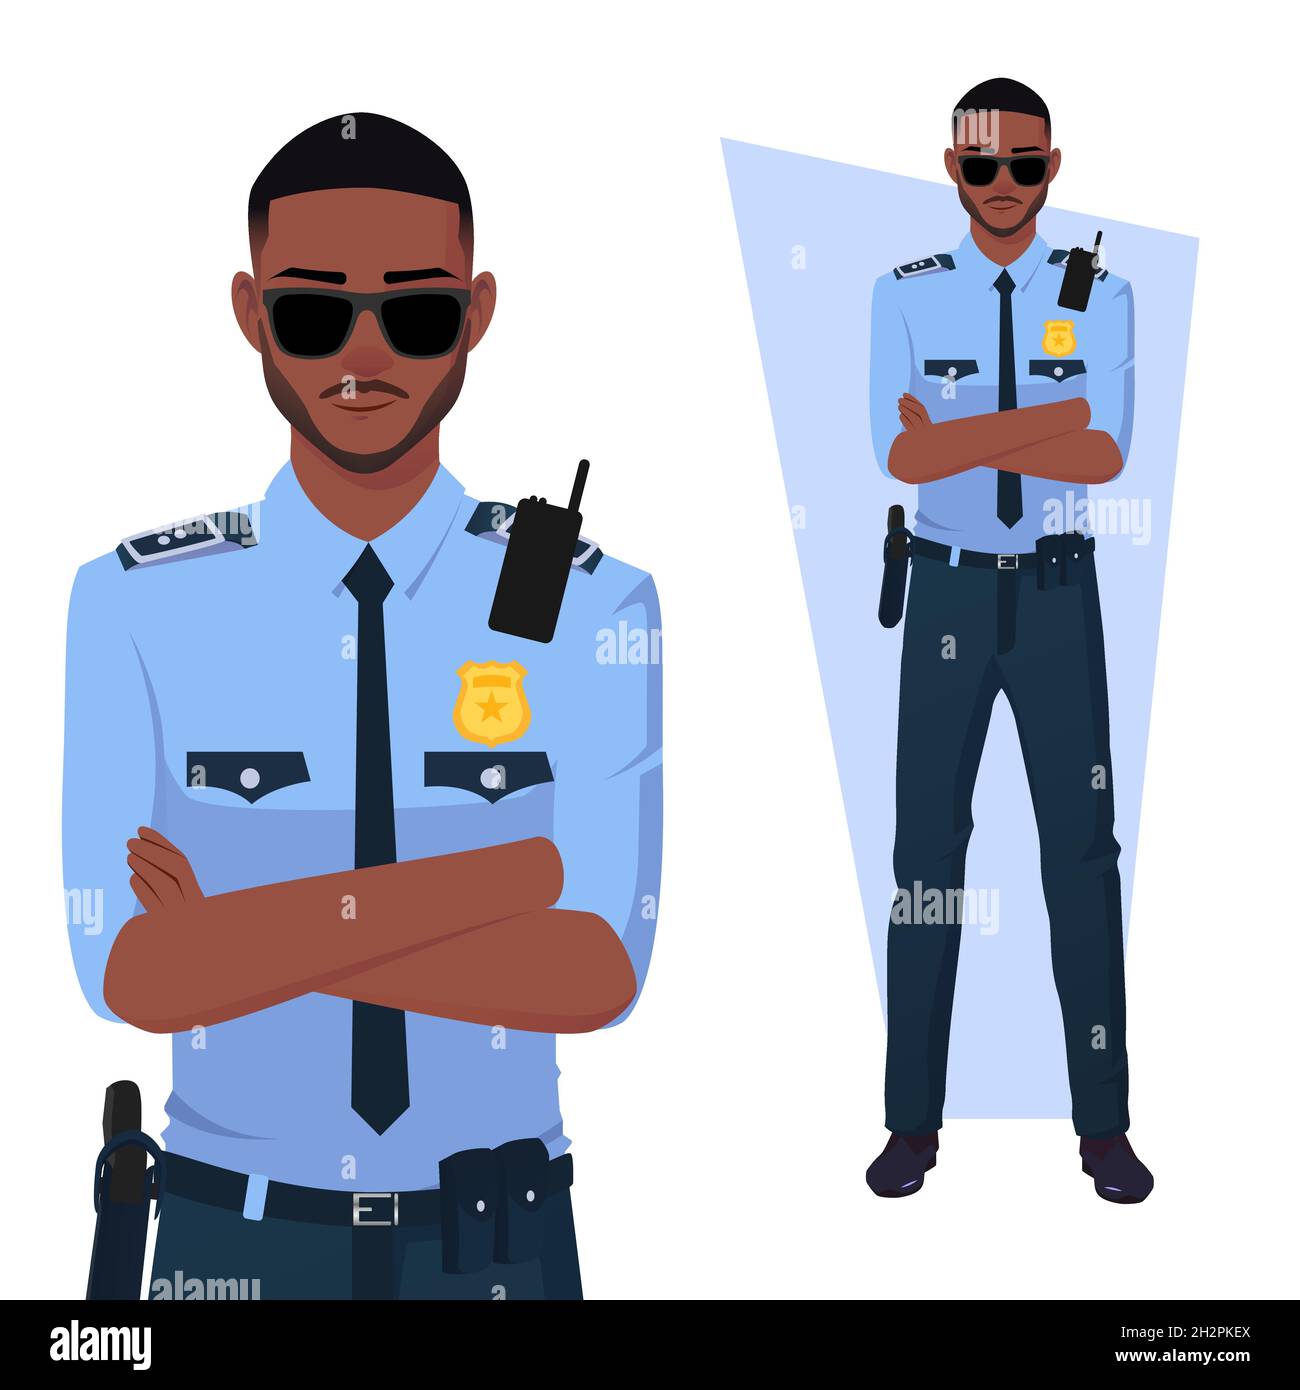 Black Policeman With Arms Folded, Wearing Uniform and Sunglasses Premium Vector Stock Vector